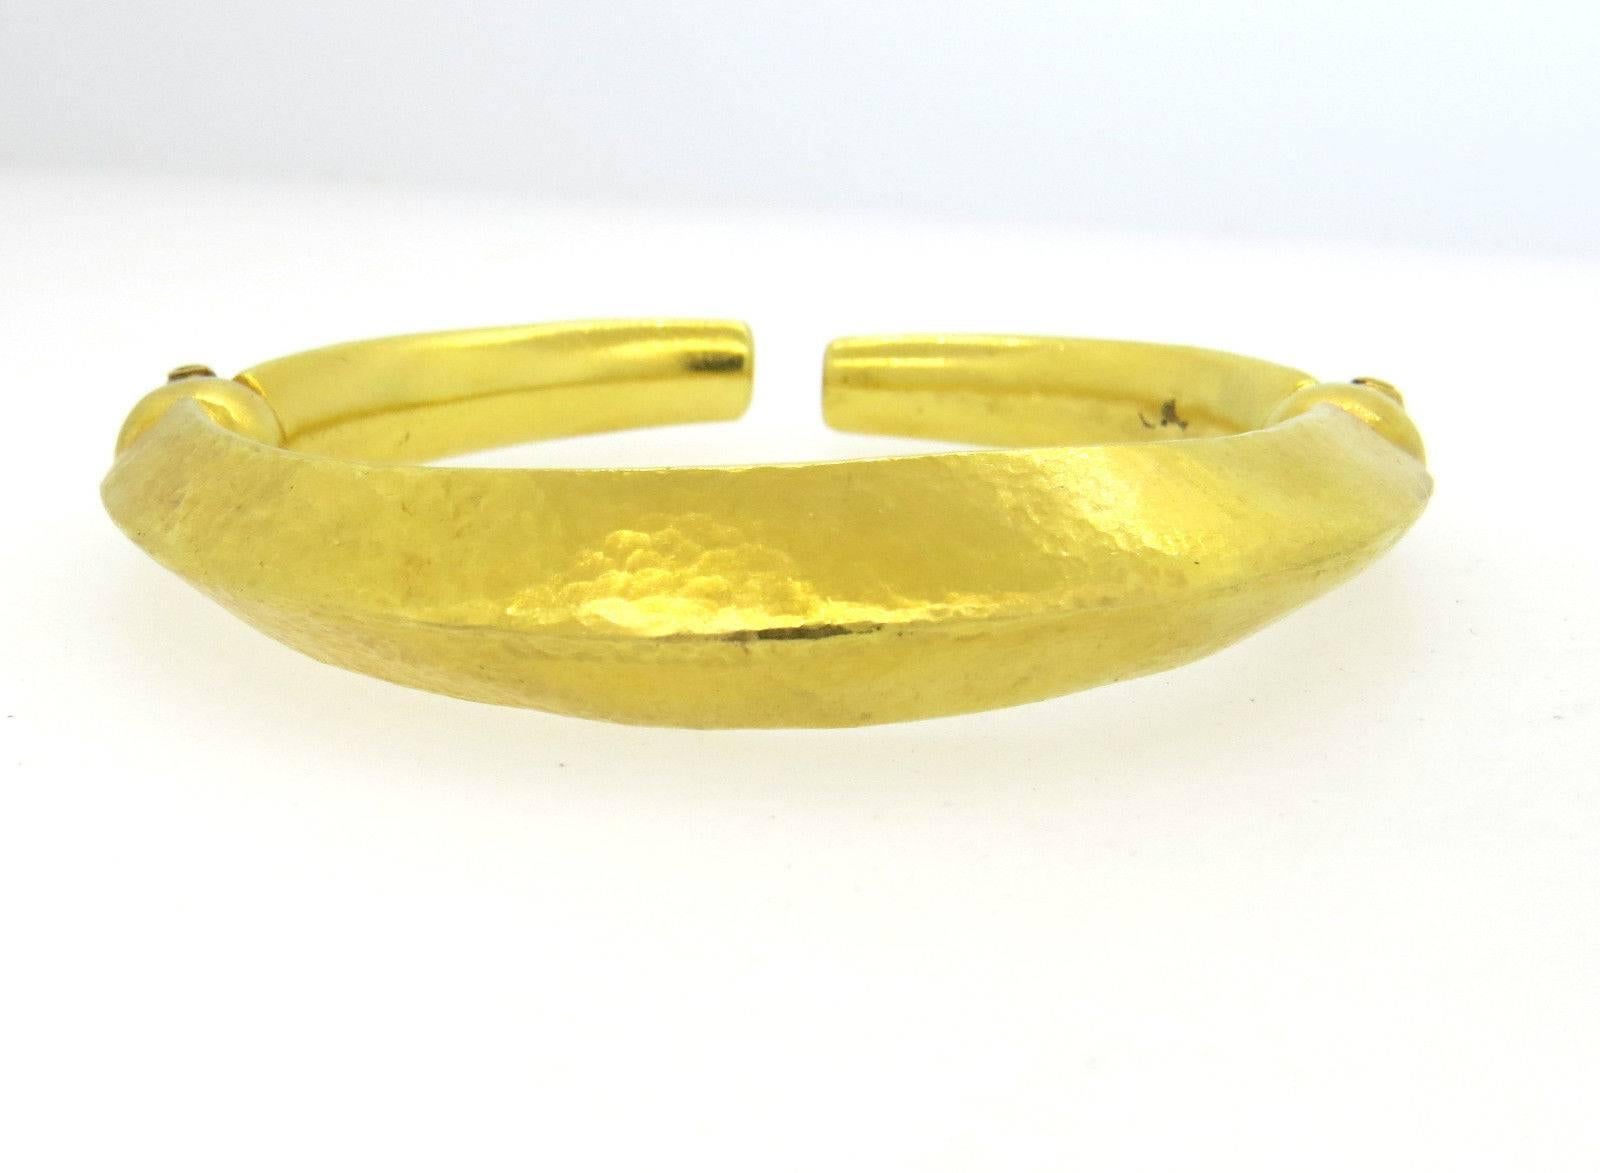 An 18k yellow gold cuff bracelet in a hammered finish.  Crafted by Ilias Lalaounis the bracelet will fit up to a 7